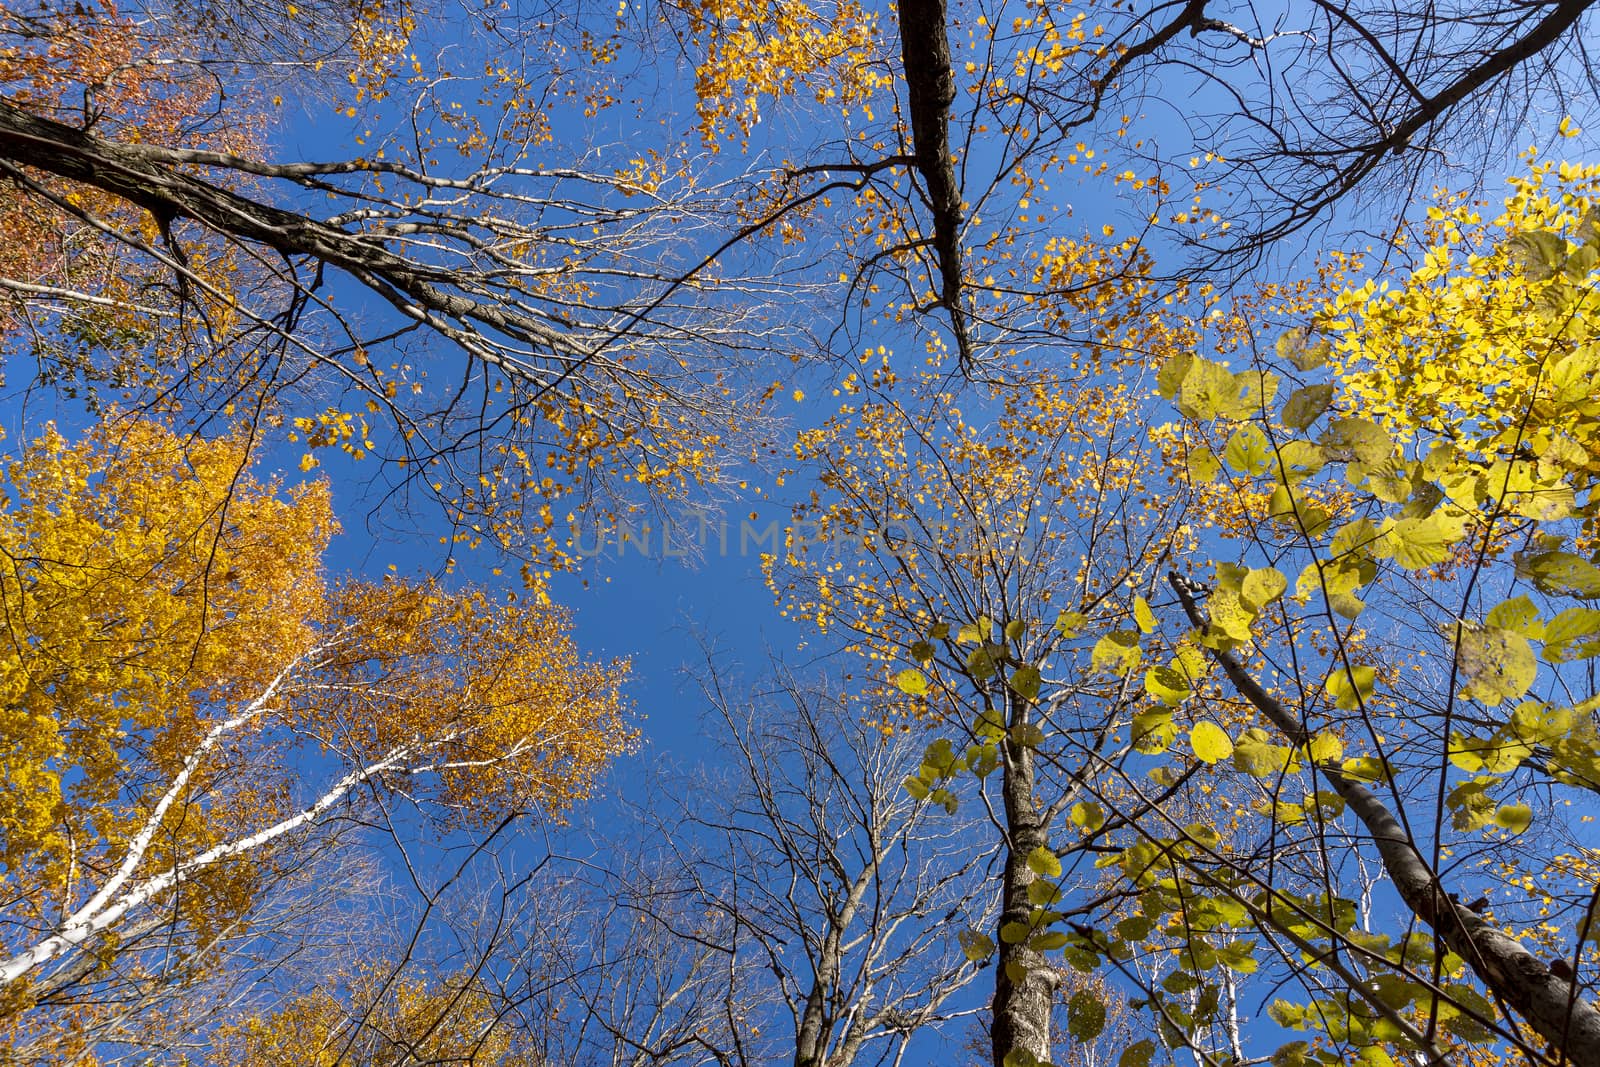 Autumn tree tops with bright orange and yellow leaves against blue sky